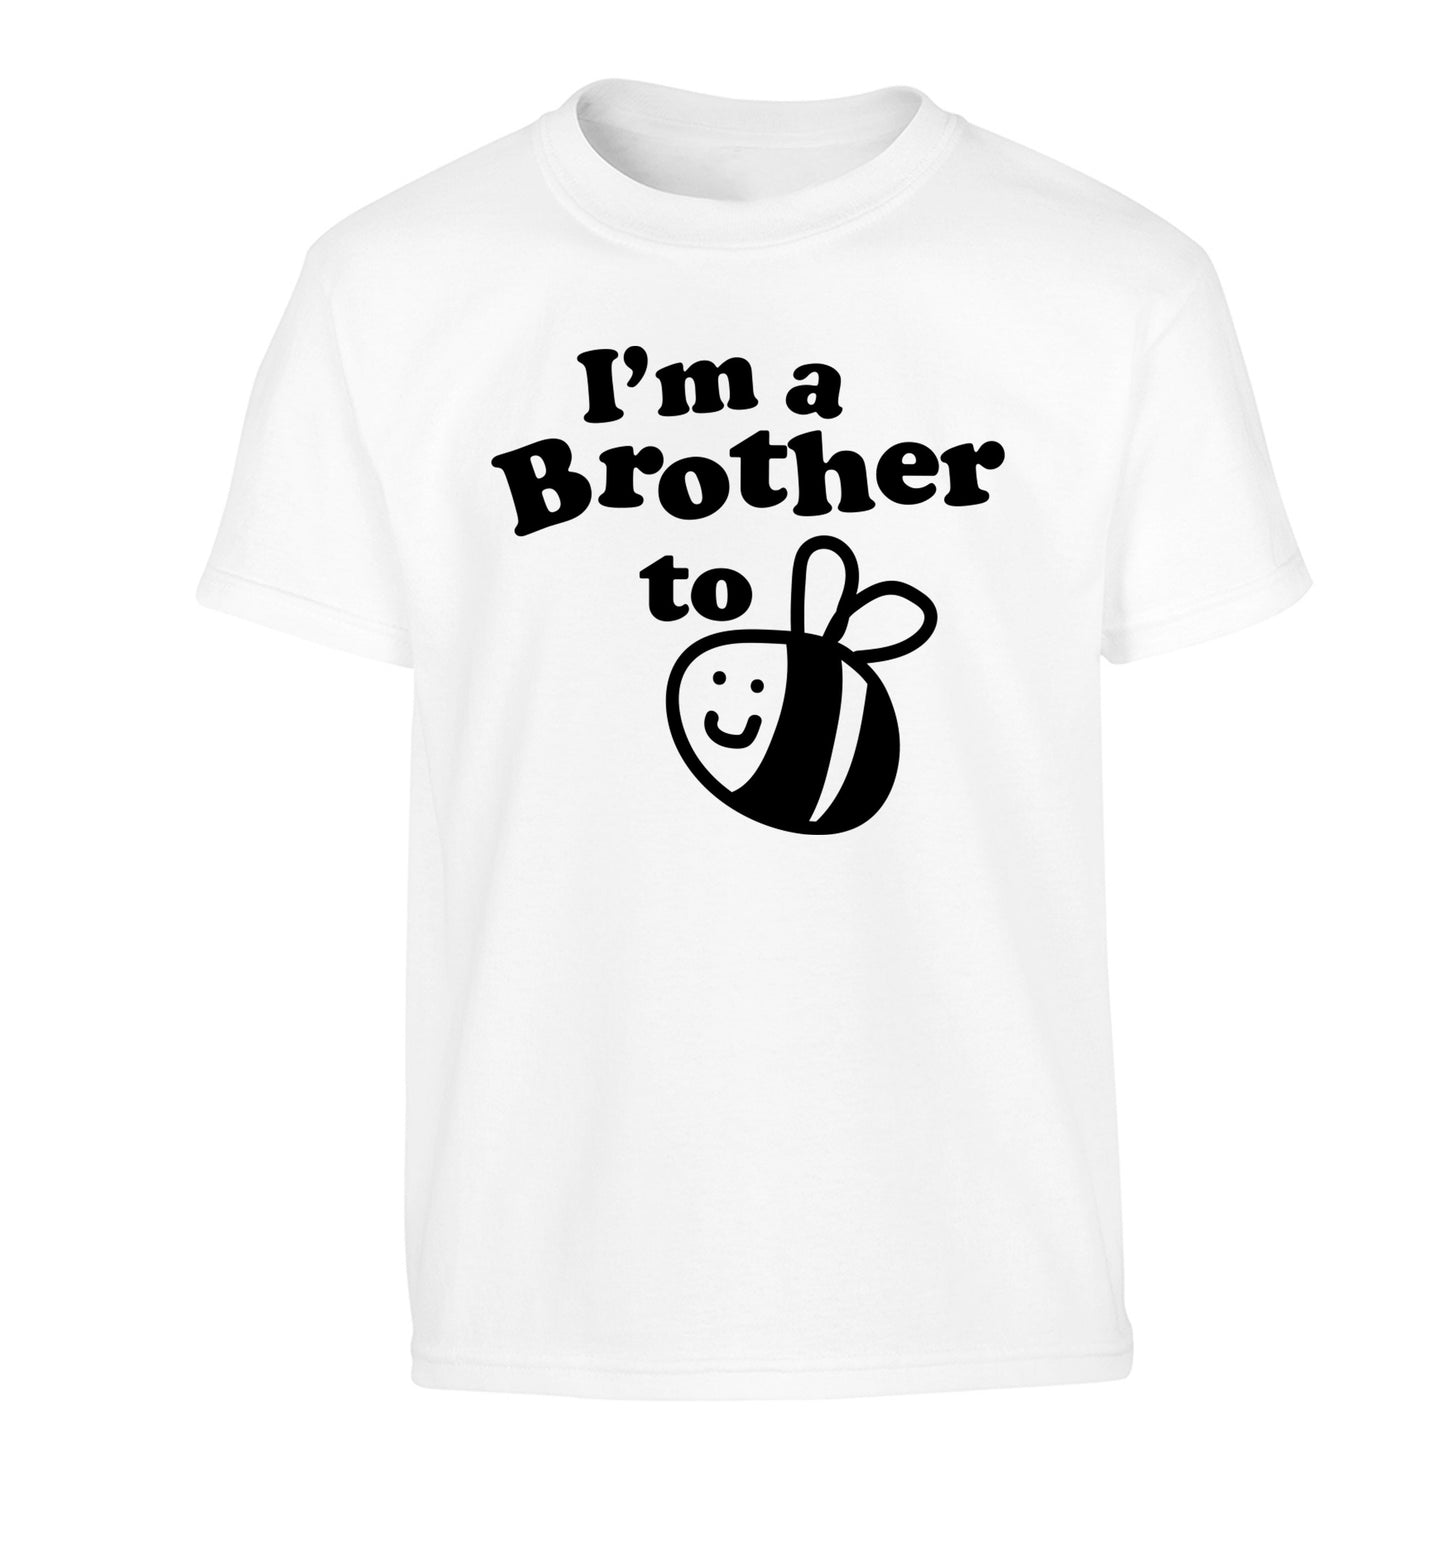 I'm a brother to be Children's white Tshirt 12-14 Years